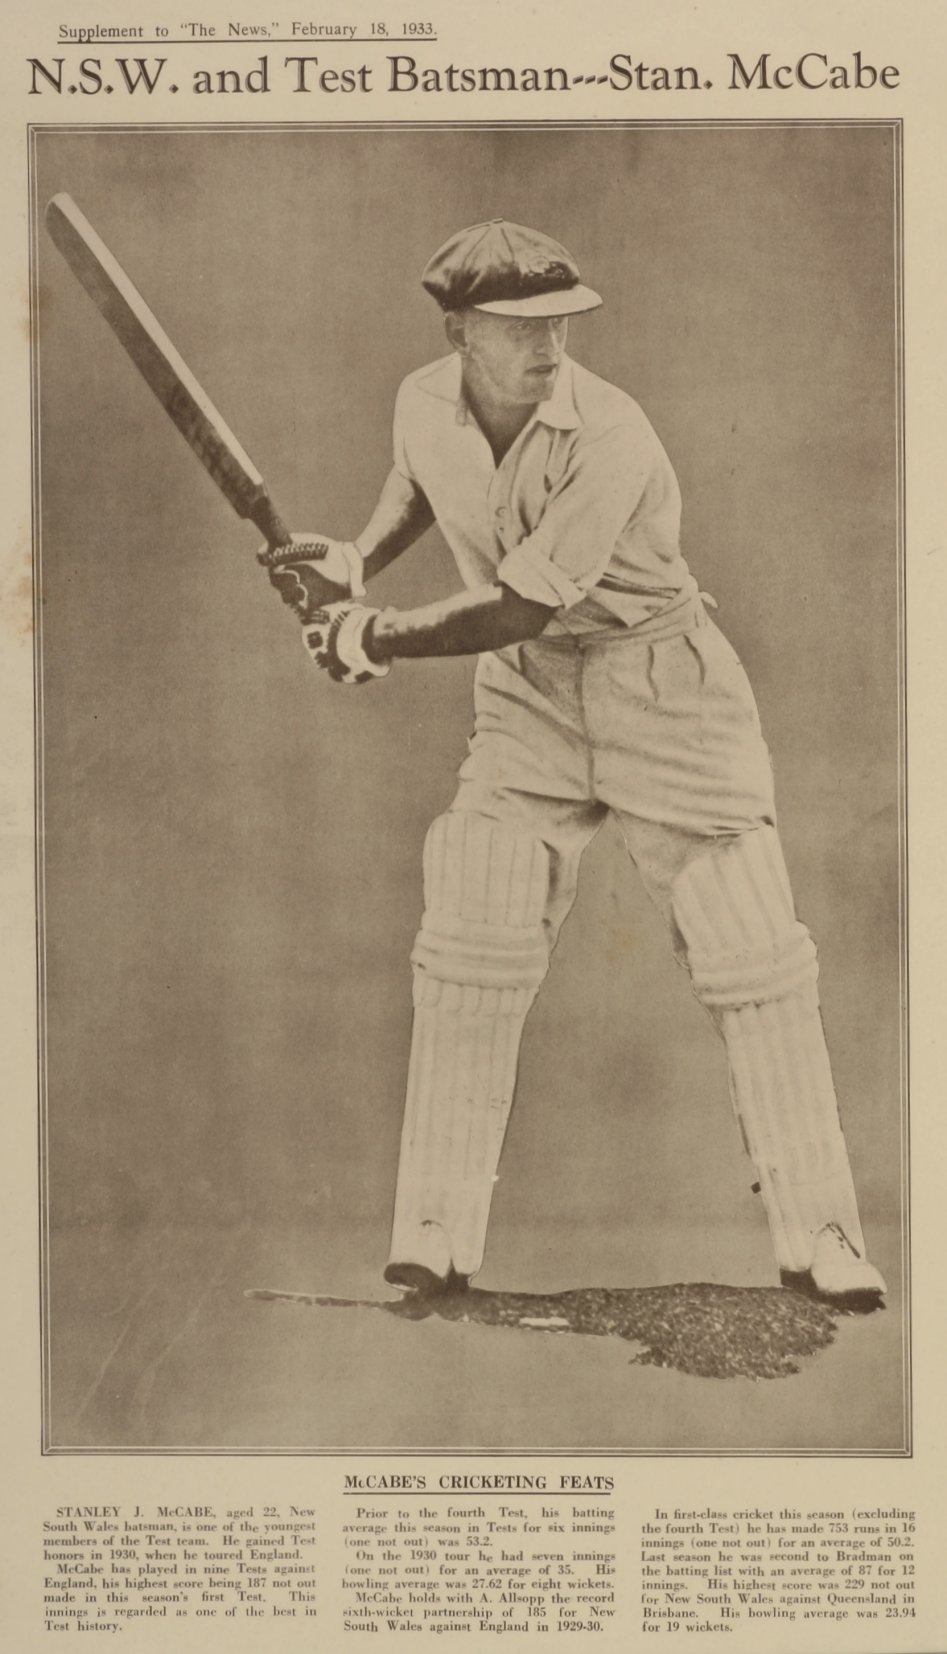 N.S.W. and Test Batsman. Stan. McCabe. - Vintage Print from 1933